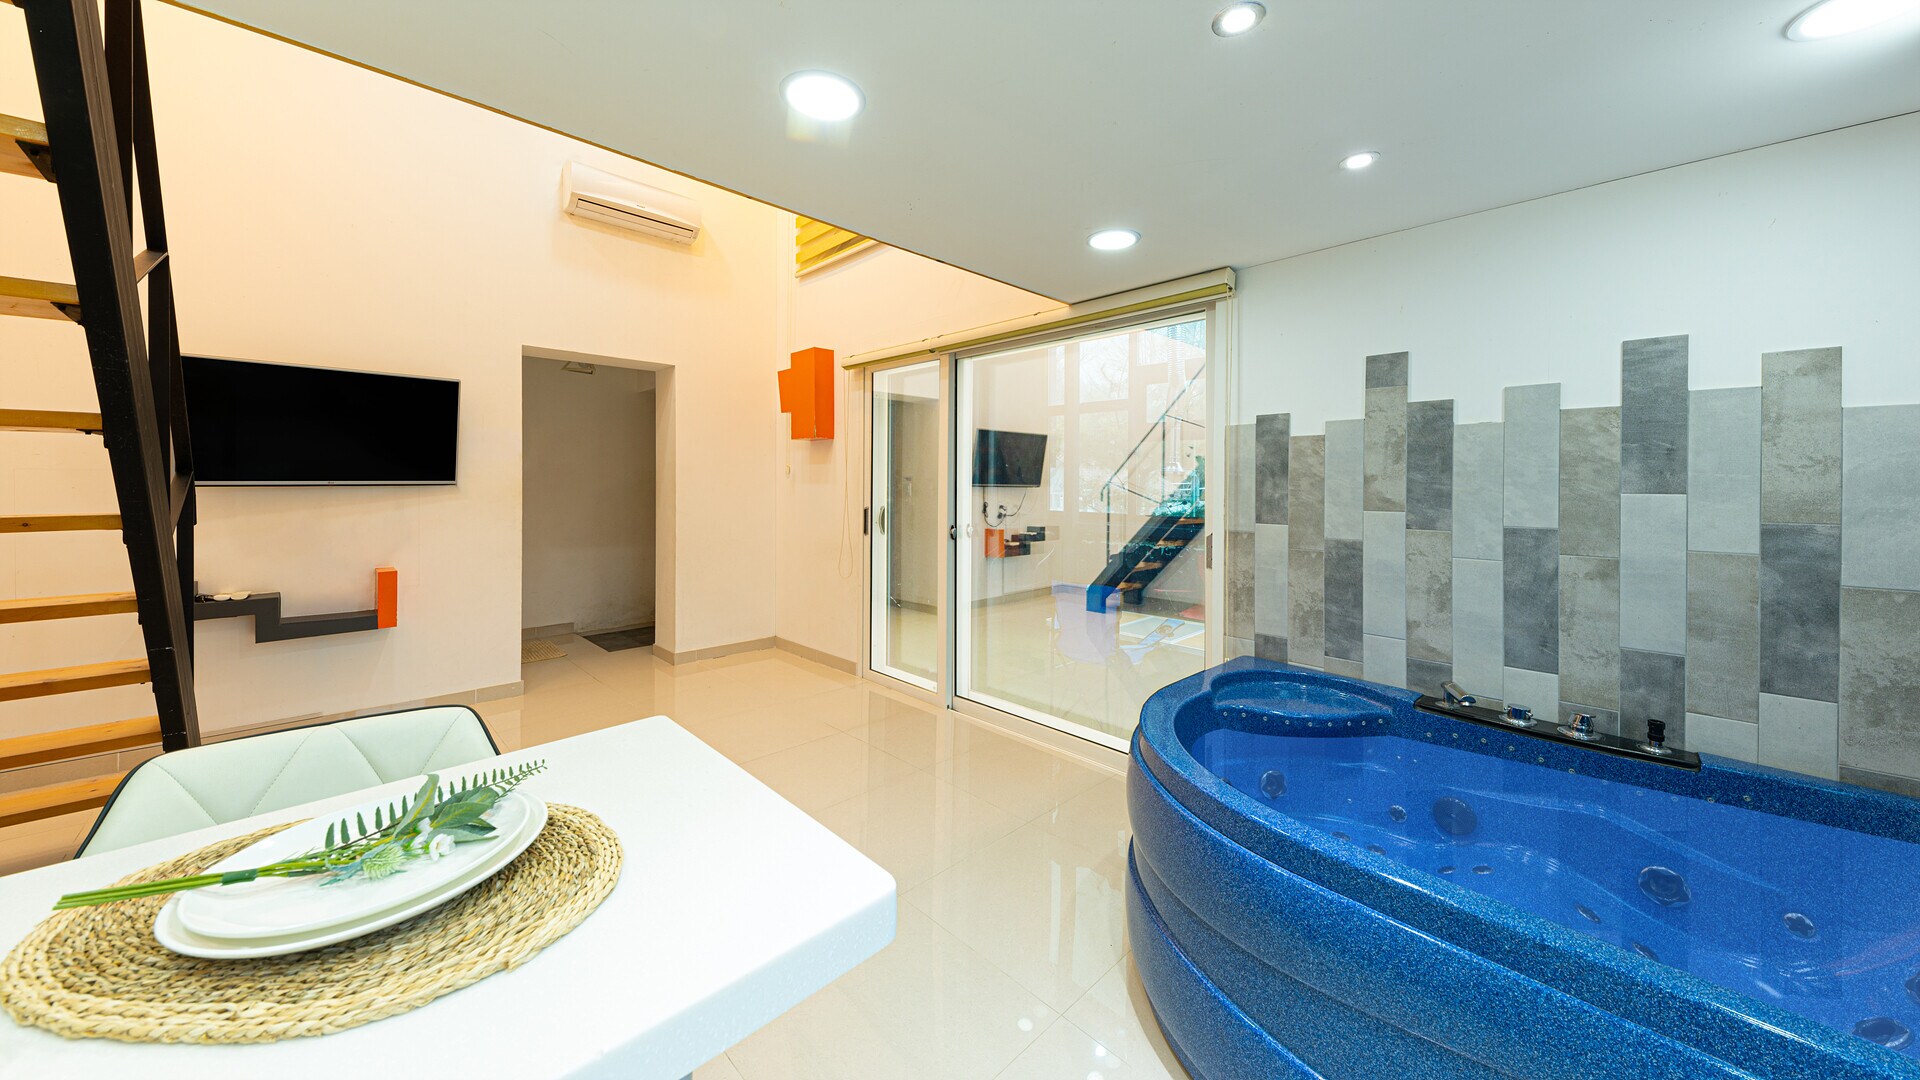 Property Image 2 - Lovely modern house best for romantic retreats 101